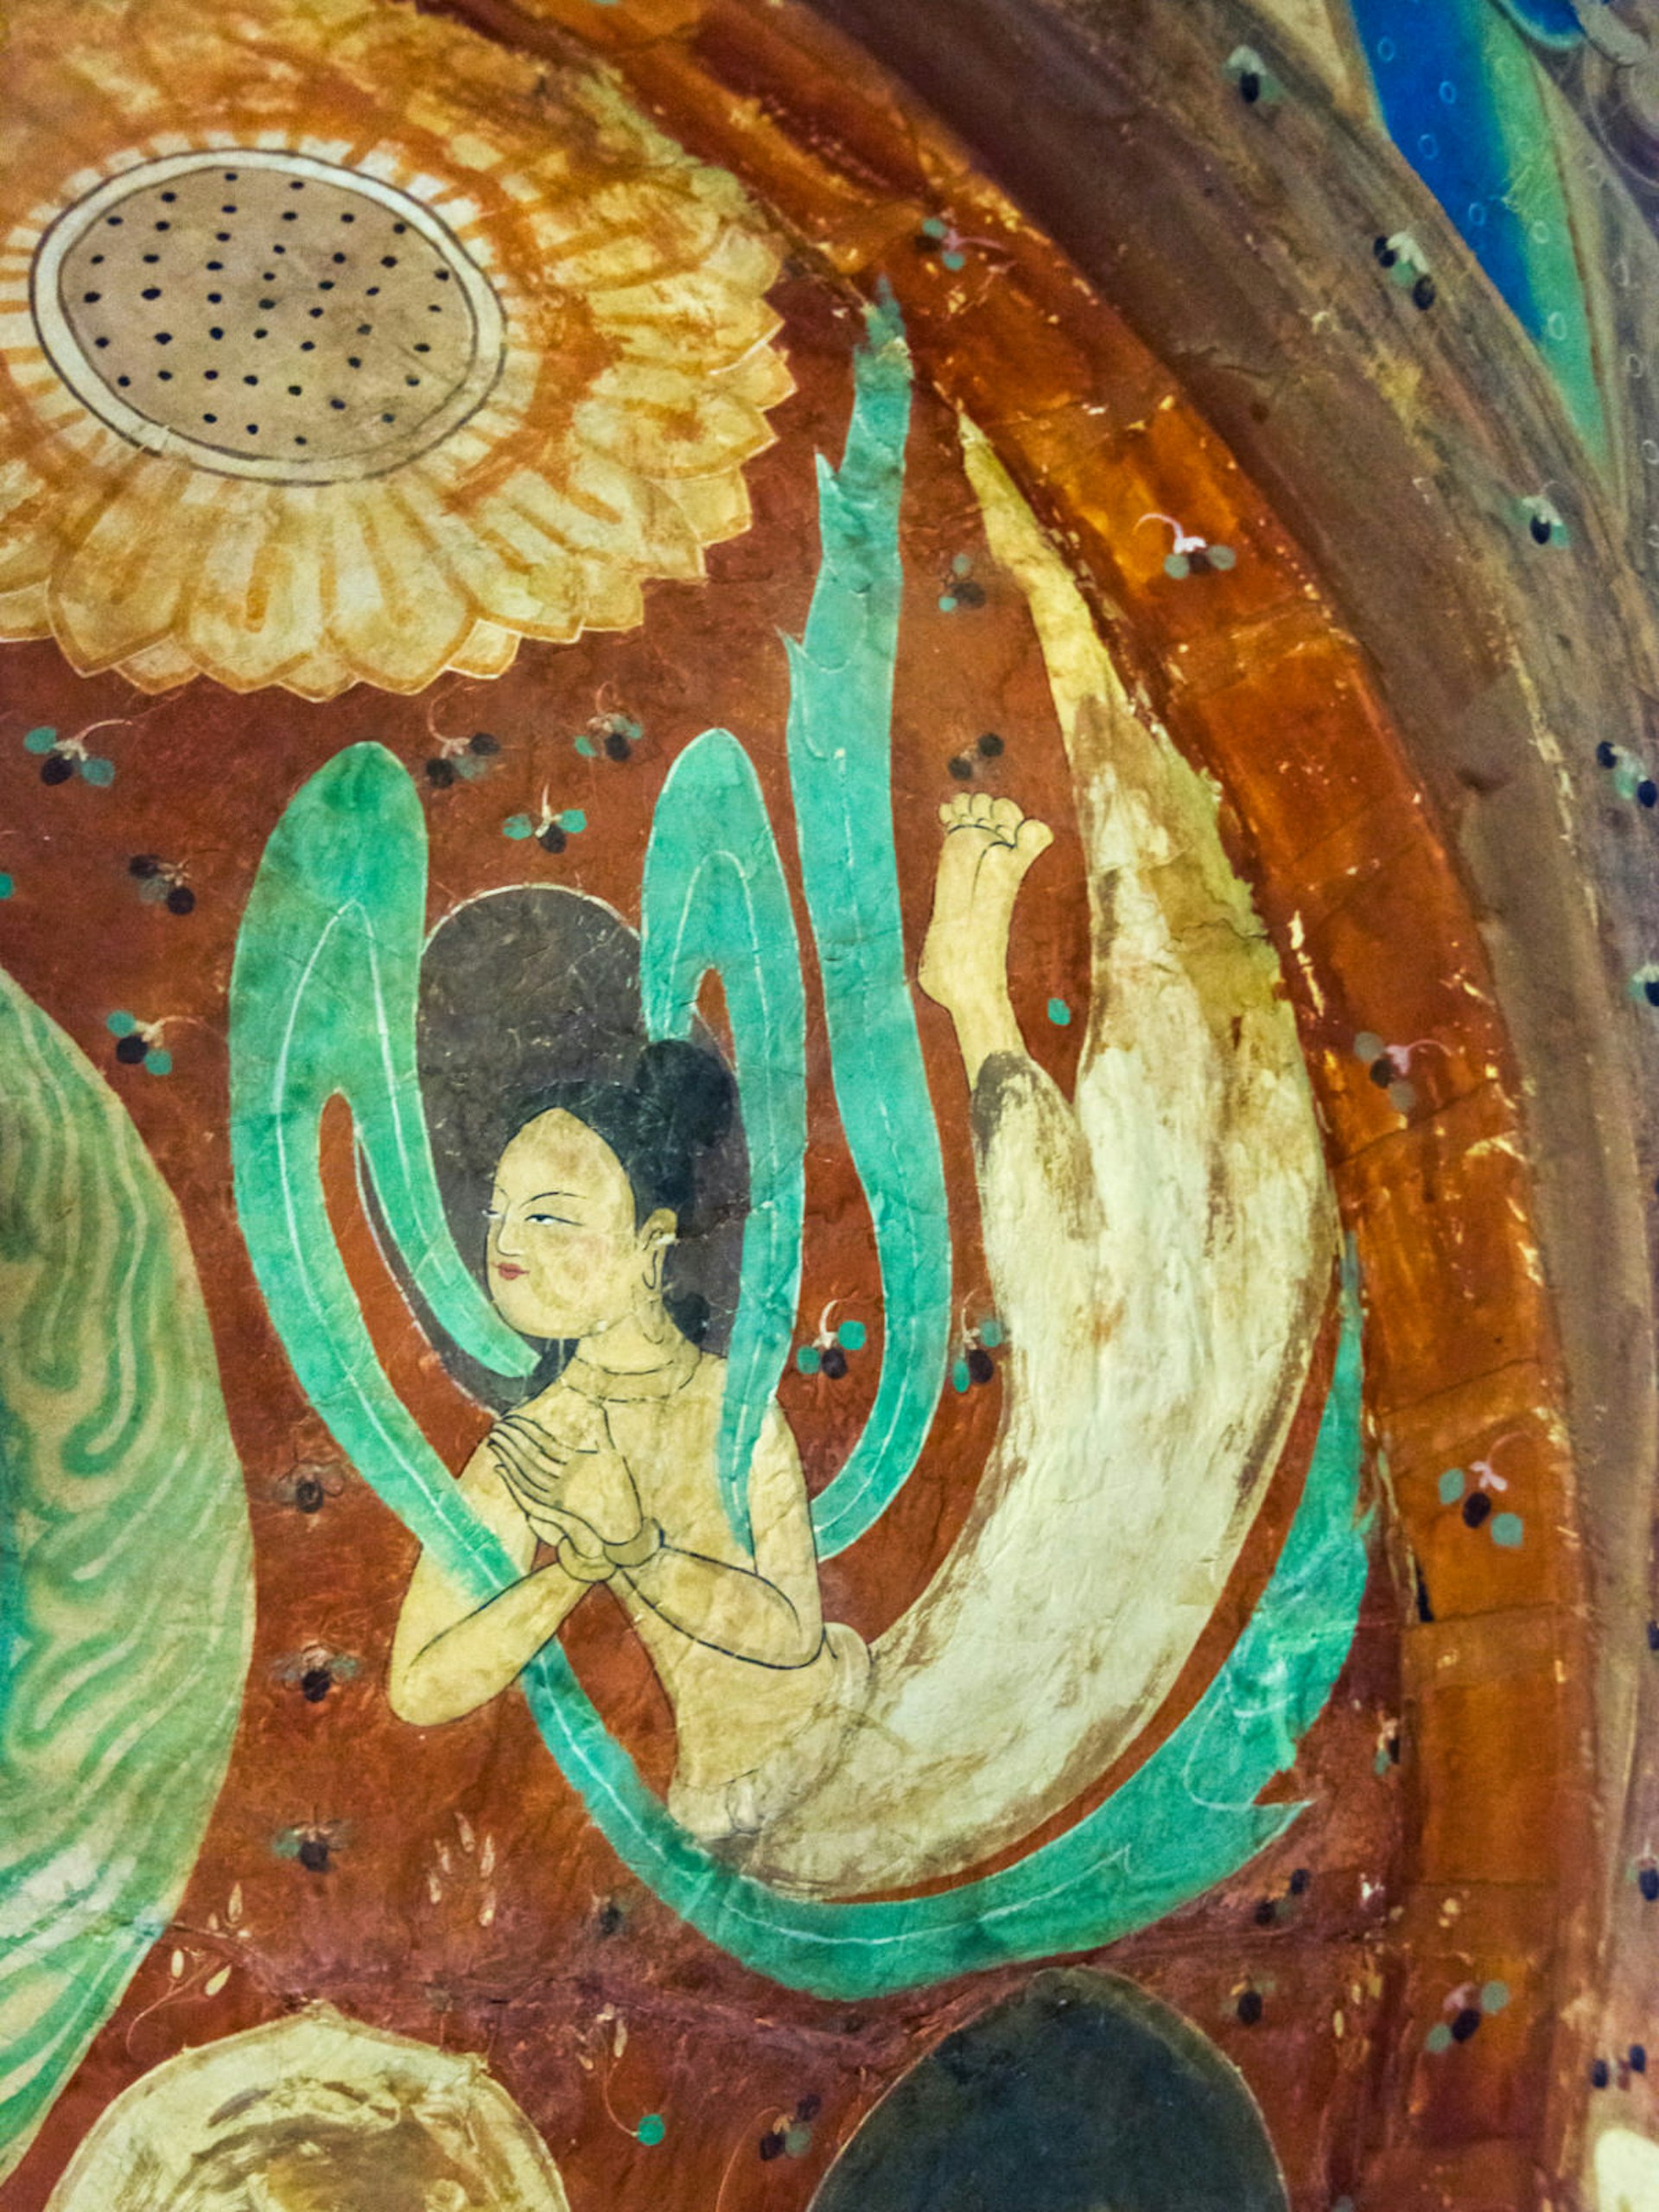 A mural of a flying Buddhist being with black hair and wafting green robes